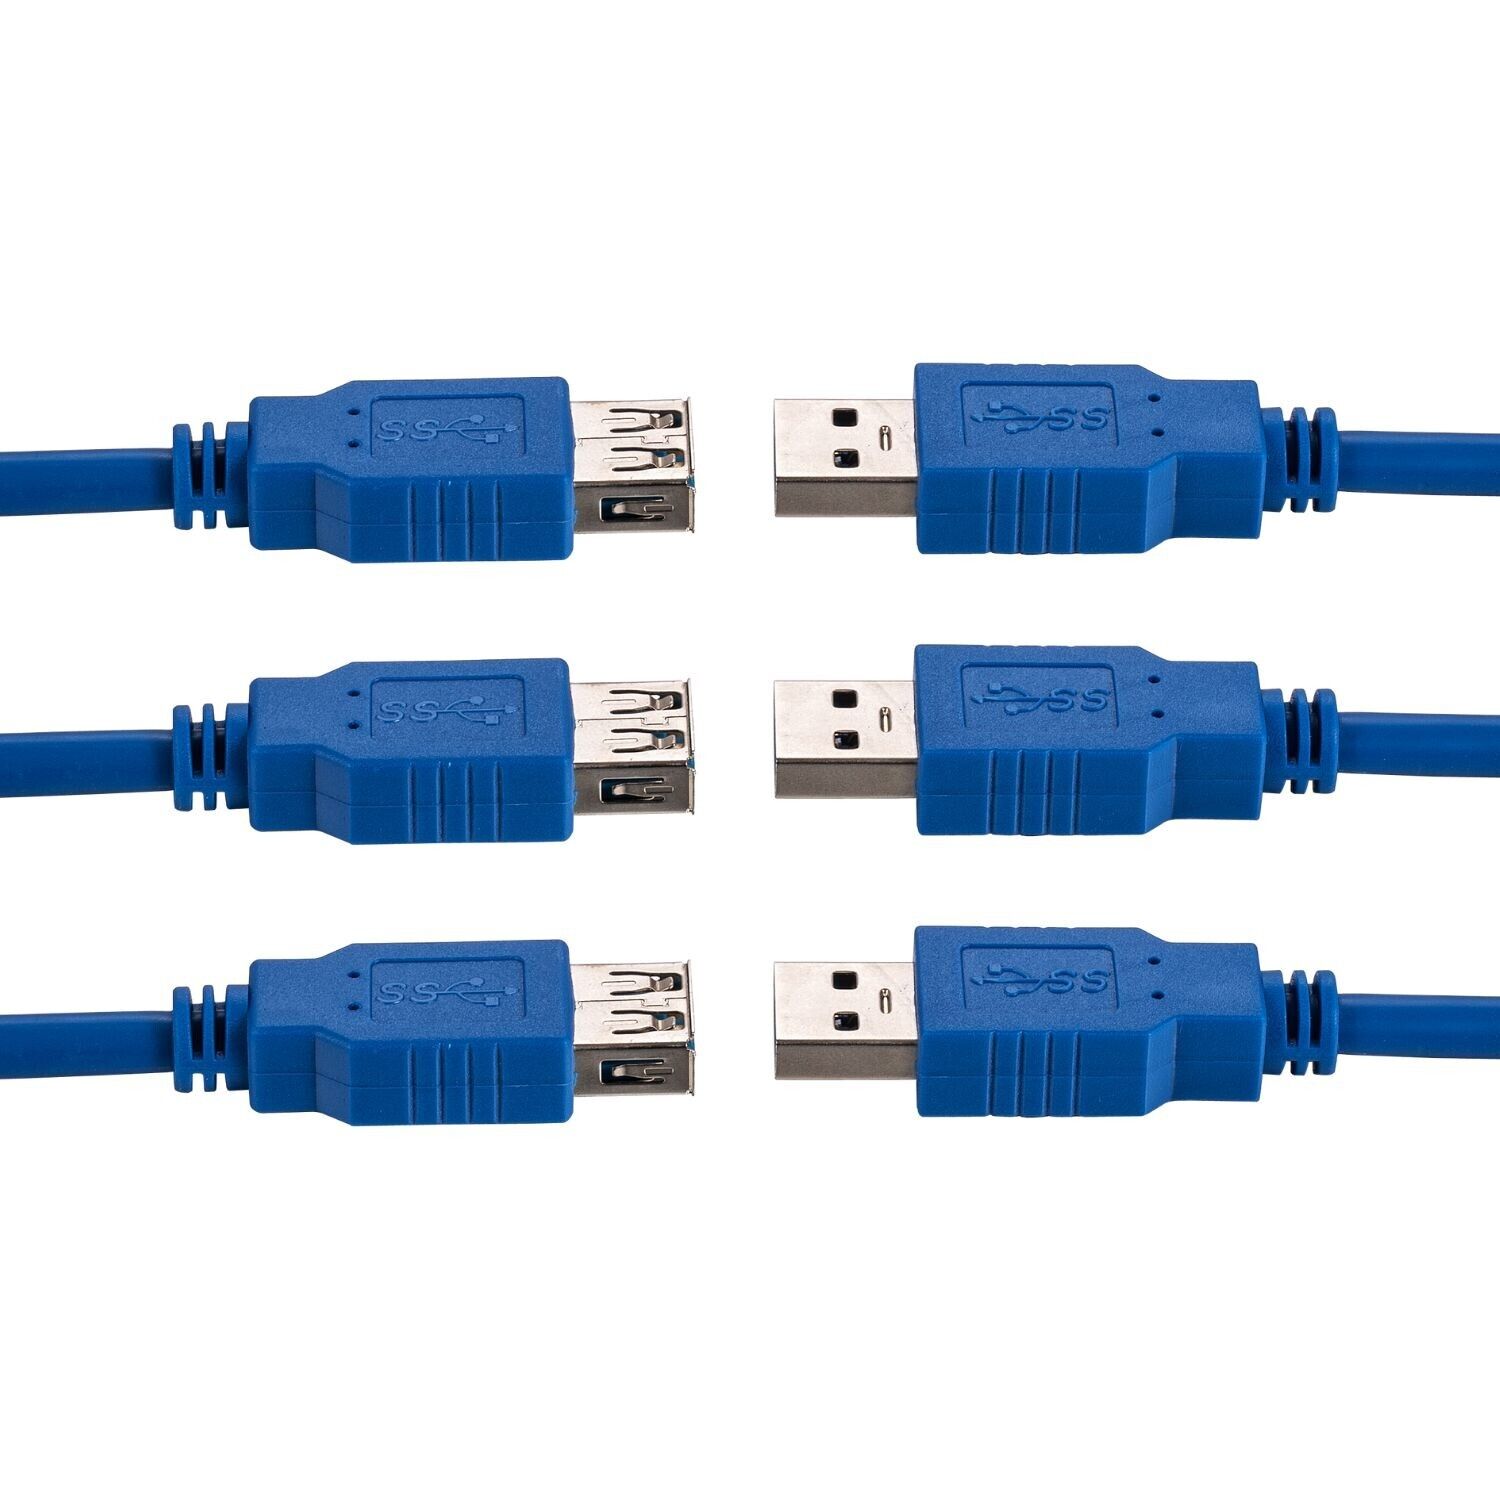 3x 6ft USB 3.0 Extension Cable Type A Male to A Female Extender HIGH SPEED Blue